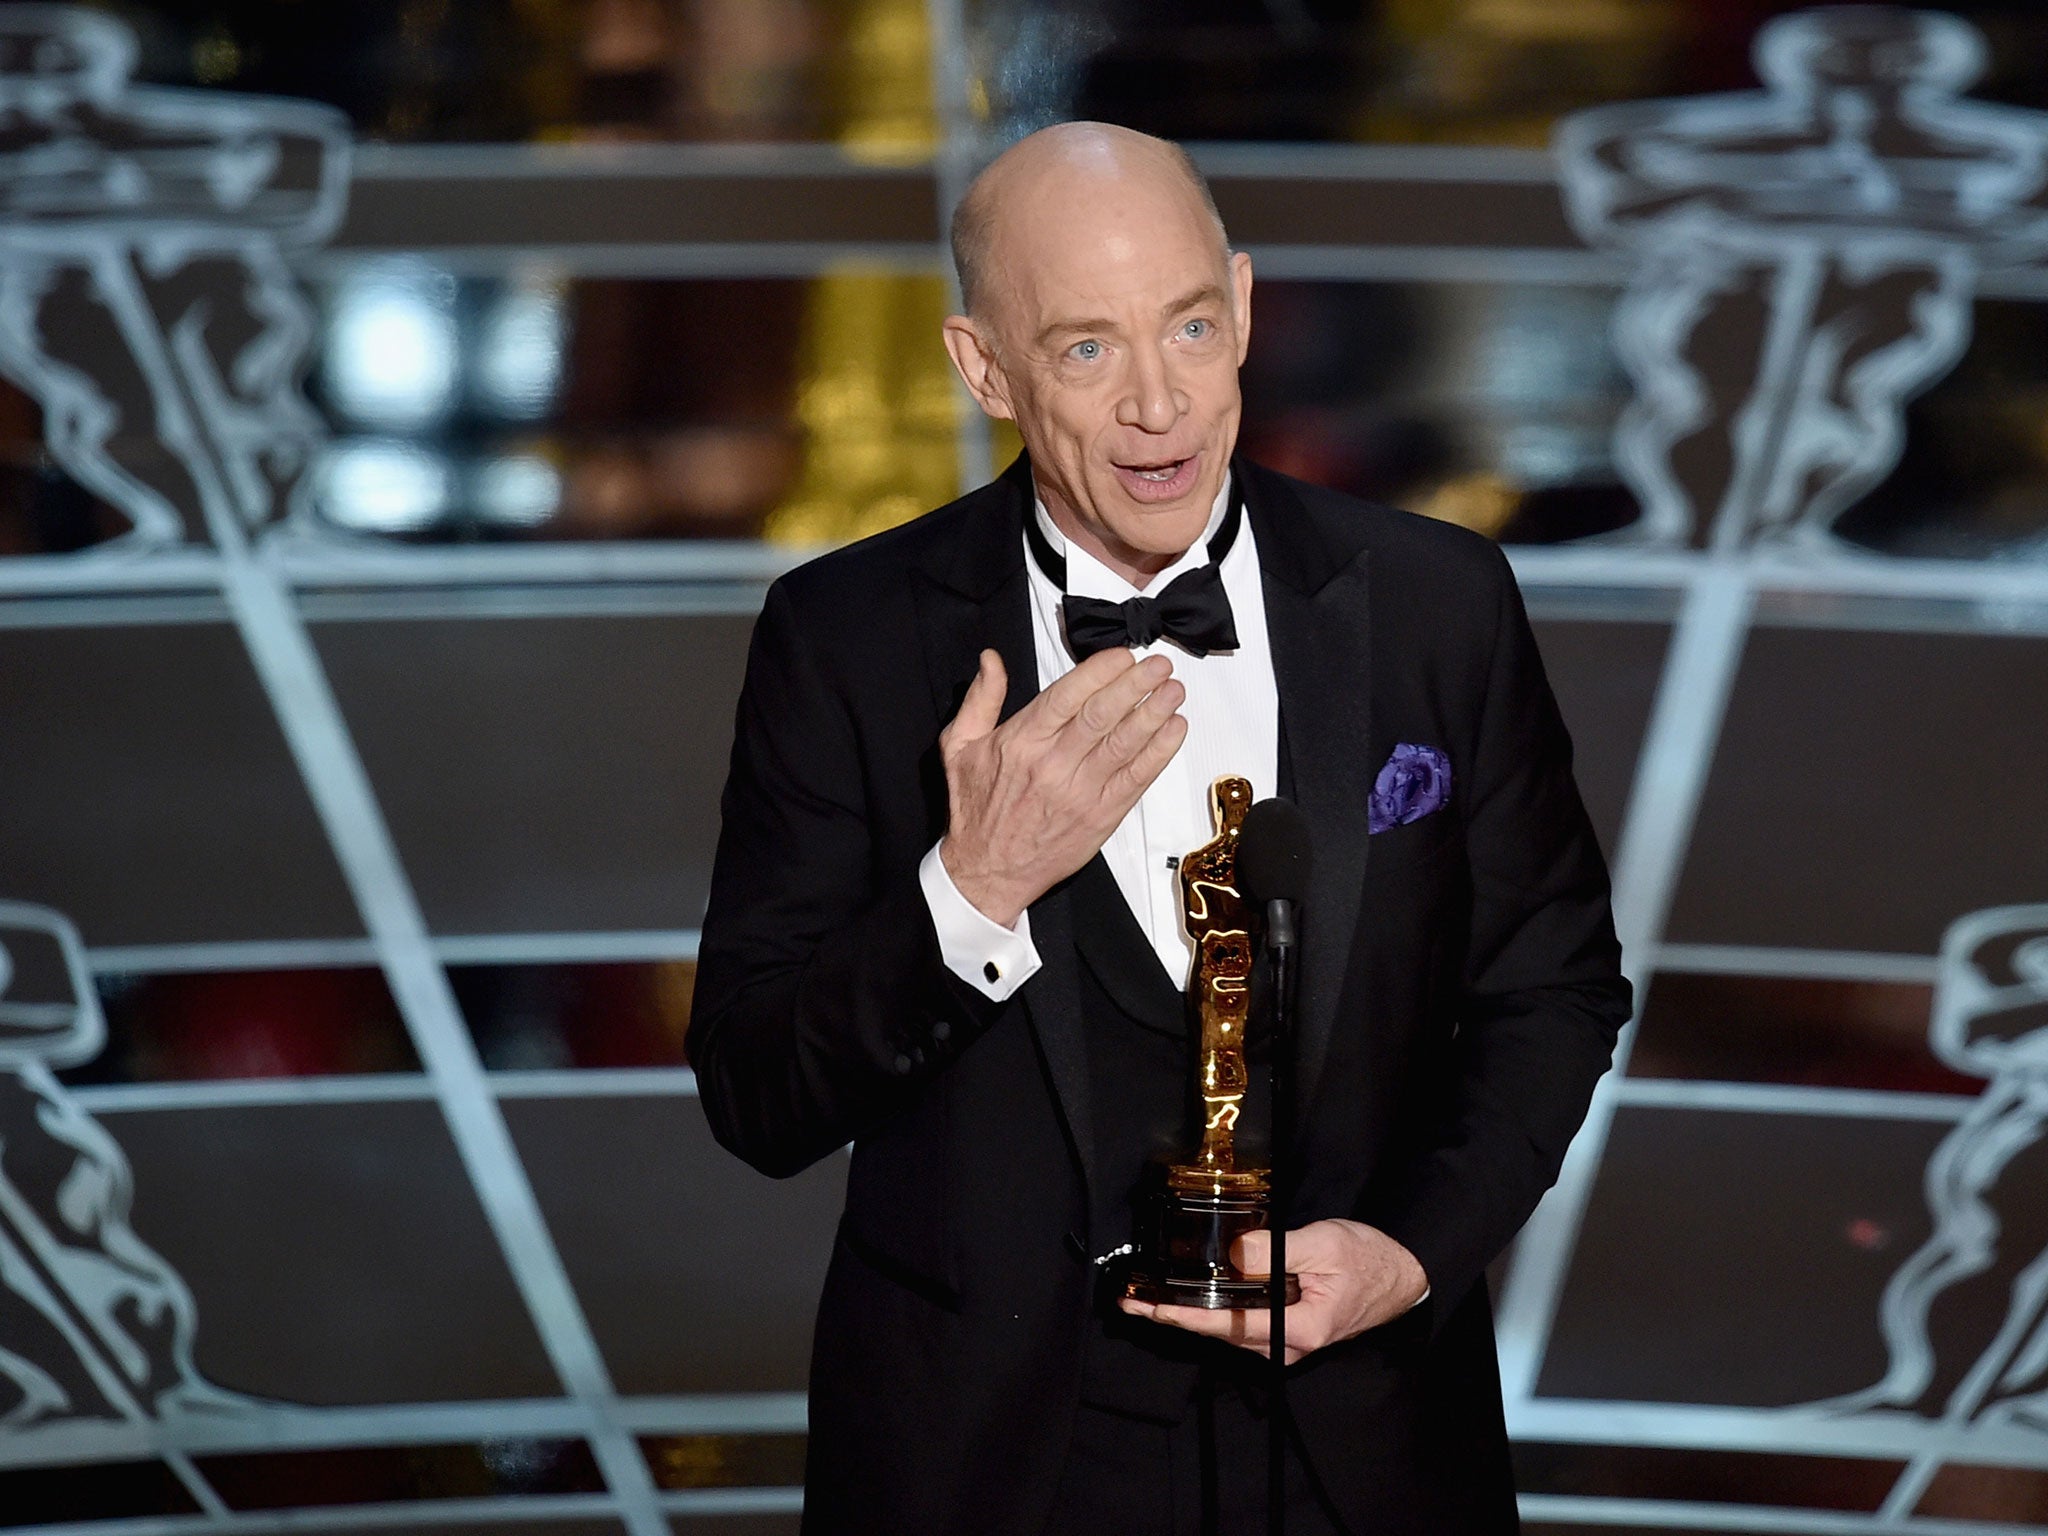 JK Simmons accepting his Best Actor Award